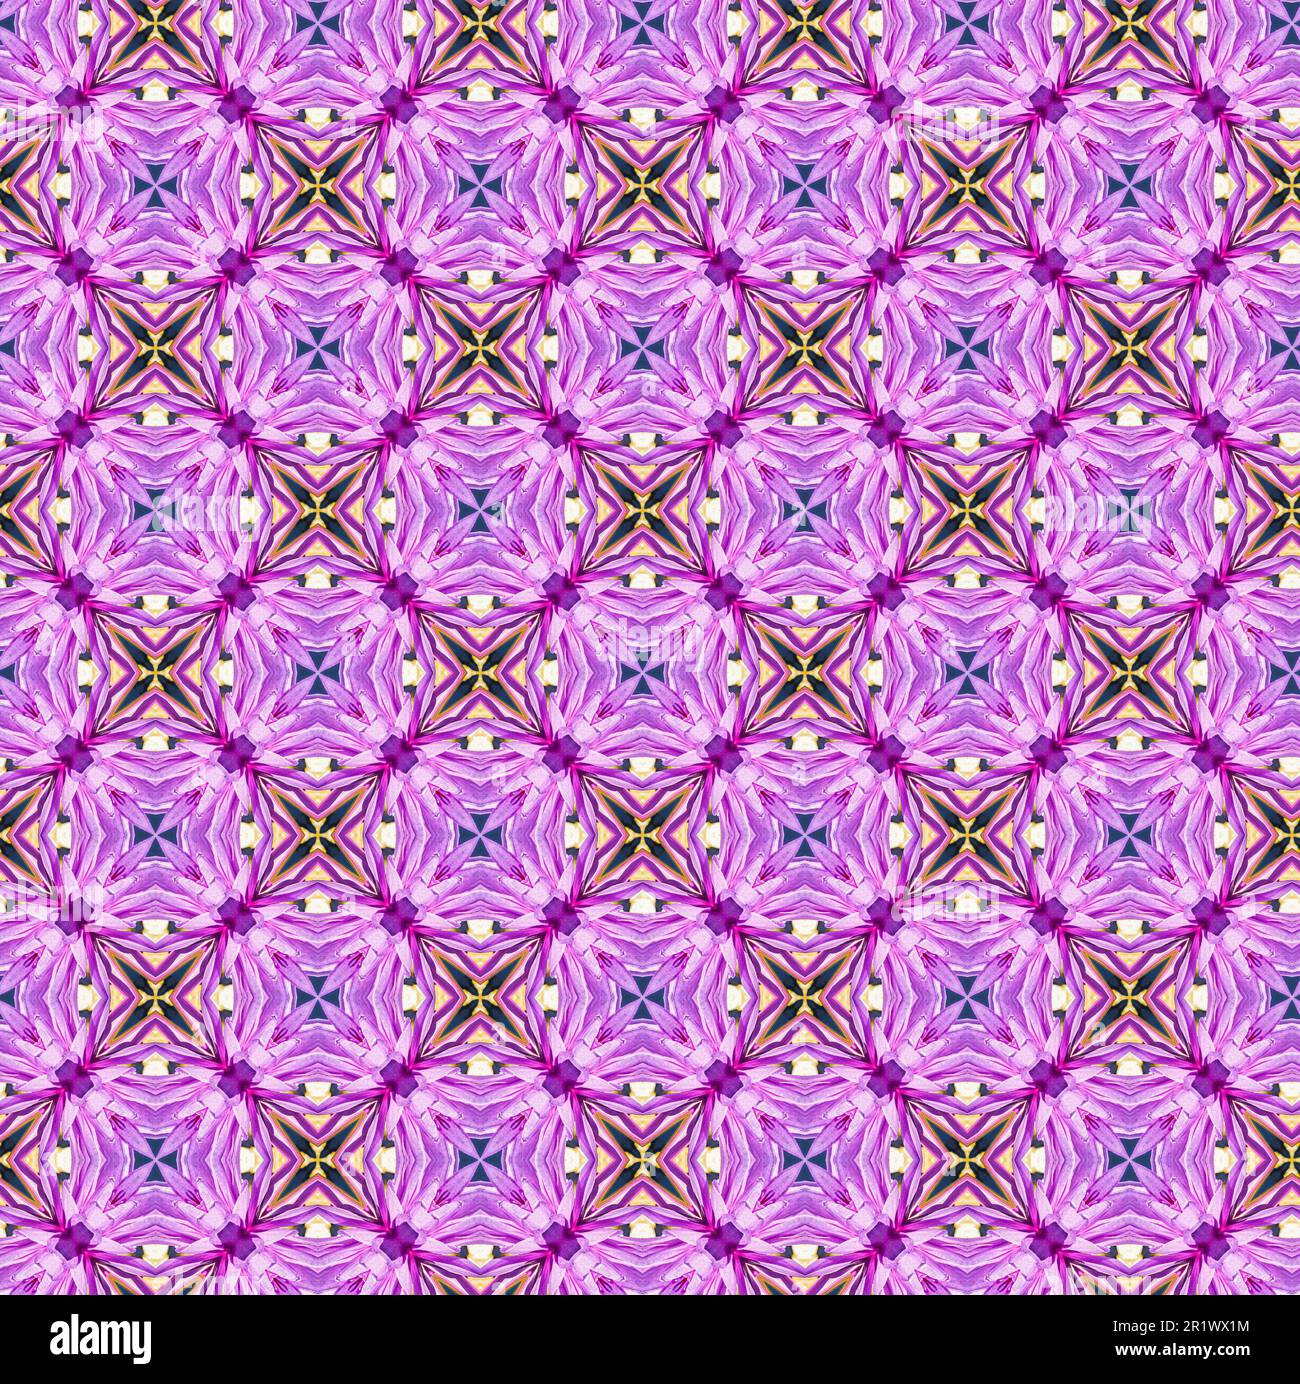 Painterly abstract seamless pattern with organic flower petal motifs in pink and purple geometric repeating design. Stock Photo